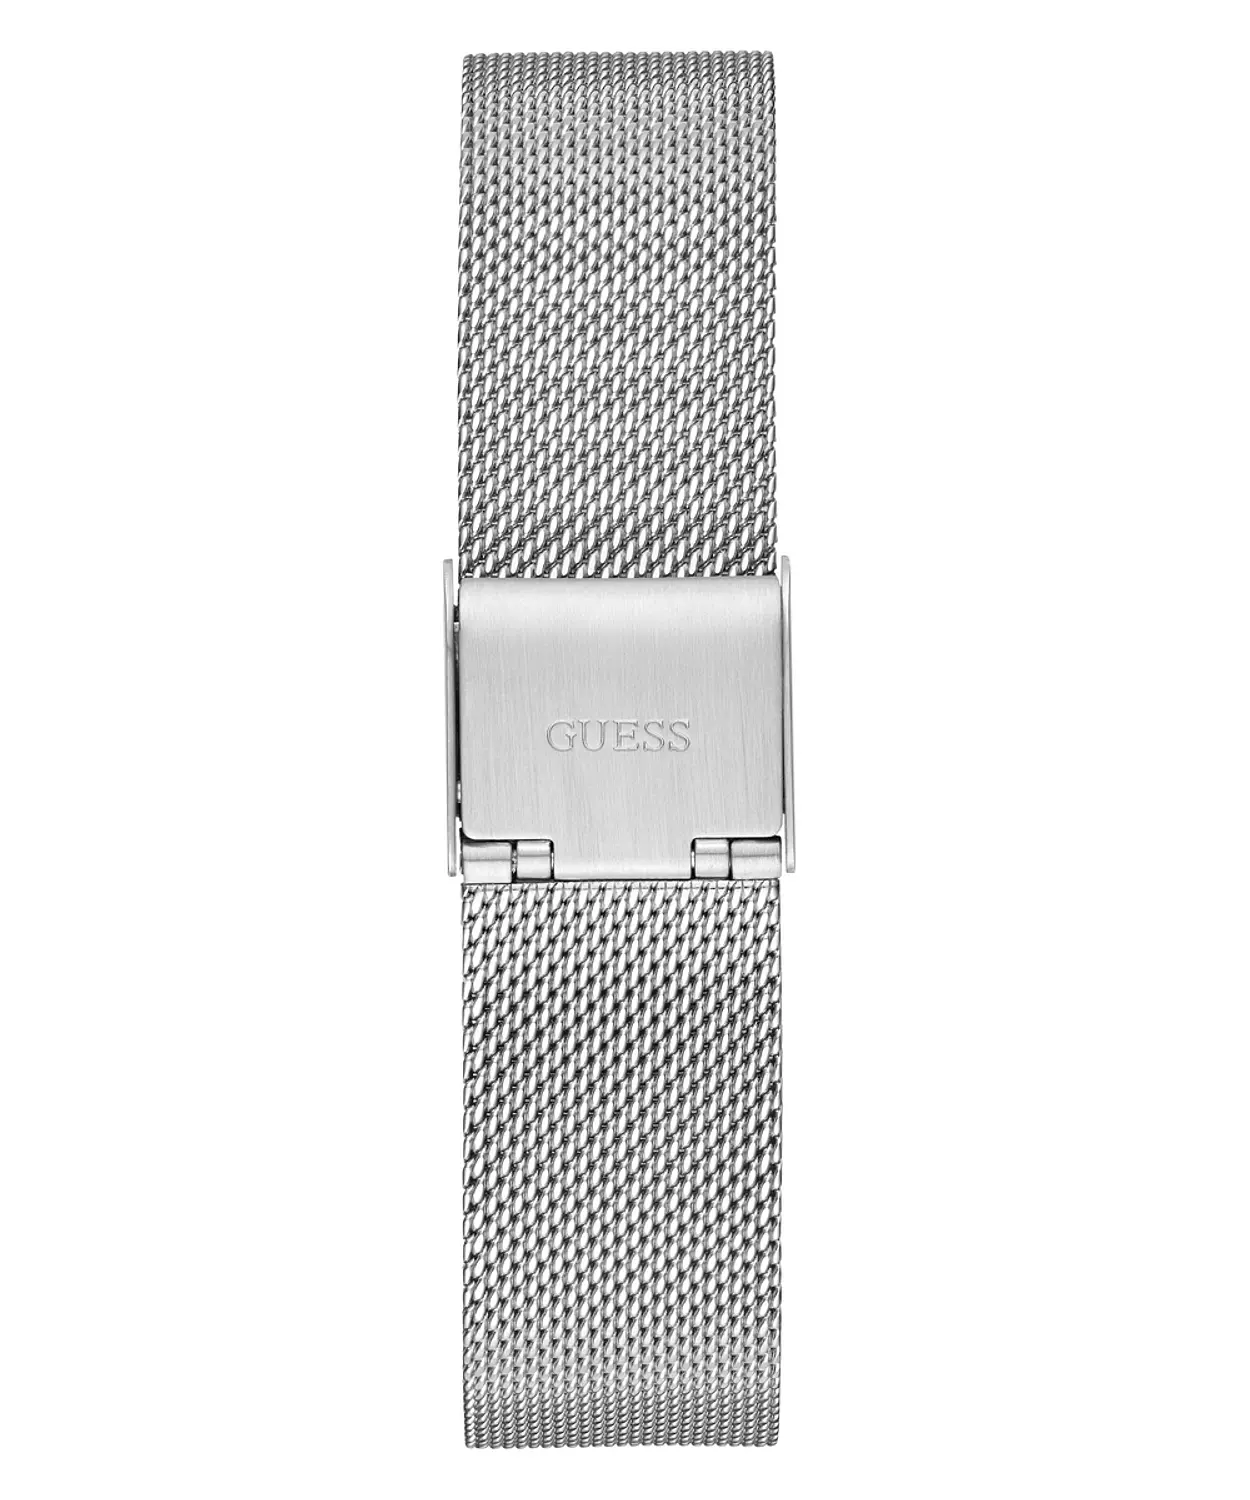 GUESS GW0032L3 ANALOG WATCH For Women Round Shape Silver Stainless Steel/Mesh Polished Bracelet 1